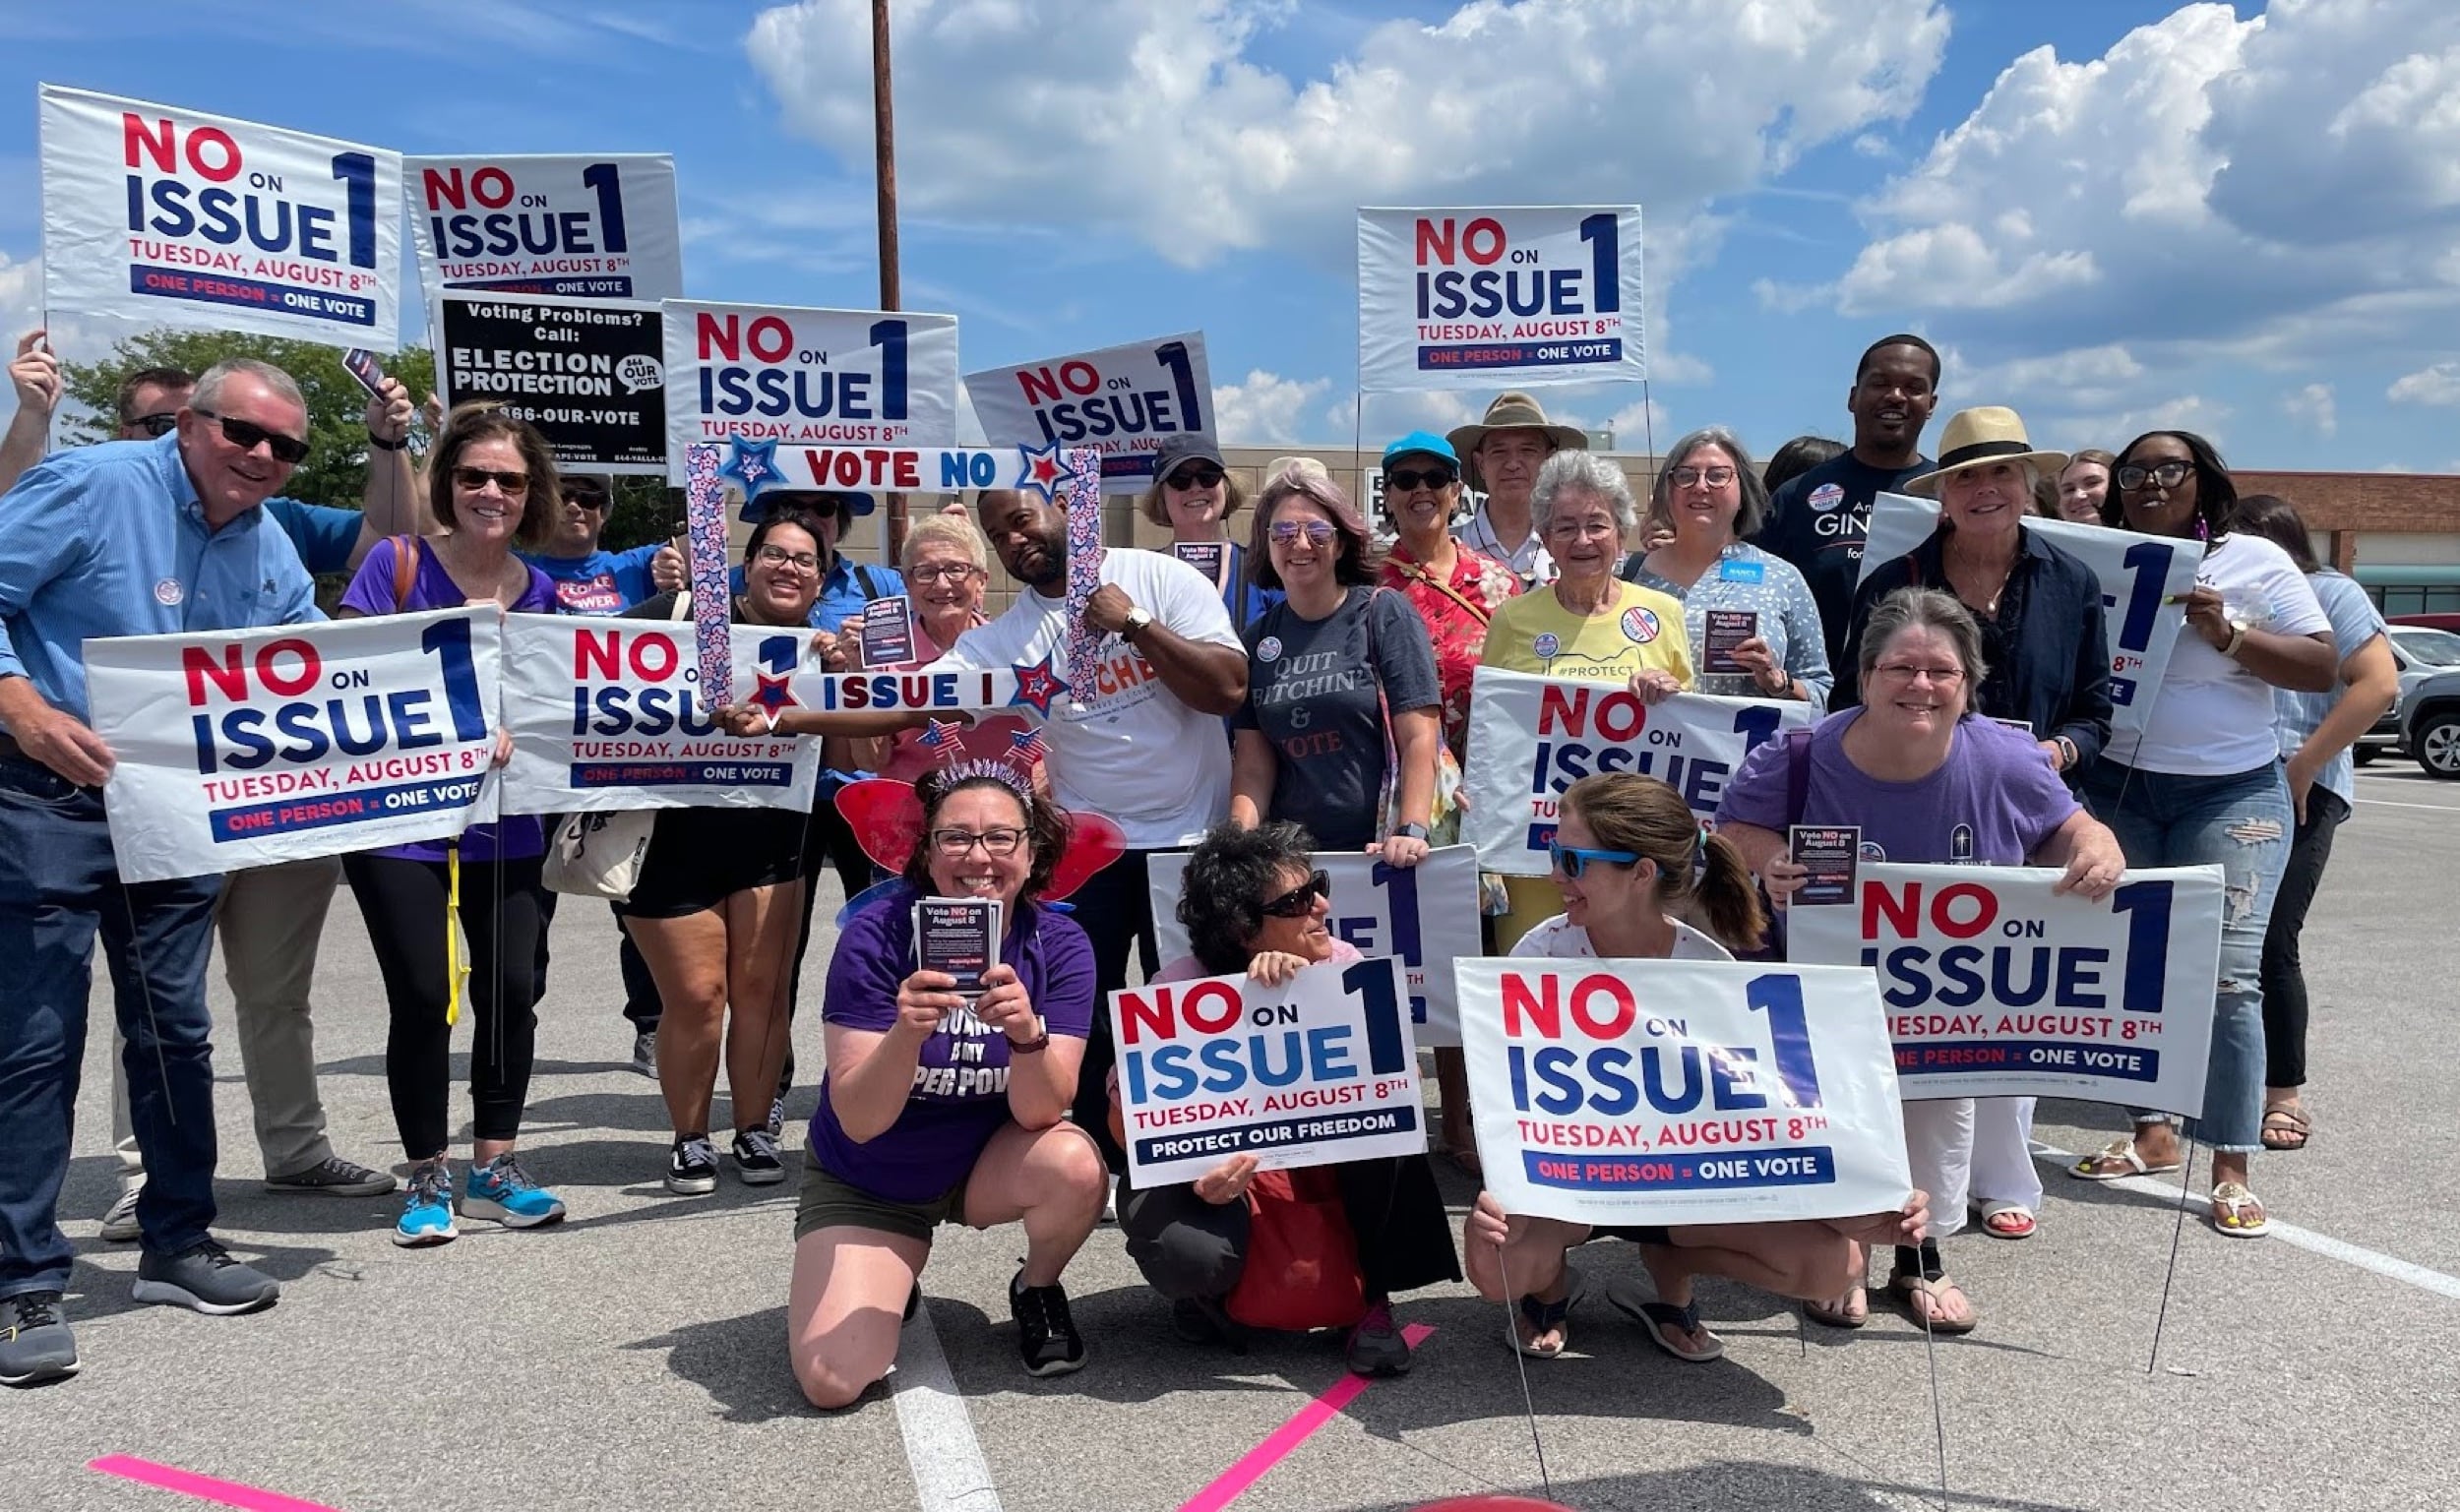 A large group of multi-racial and multigenerational community members posing together in a parking lot, holding signs that read ‘No on Issue #1.’